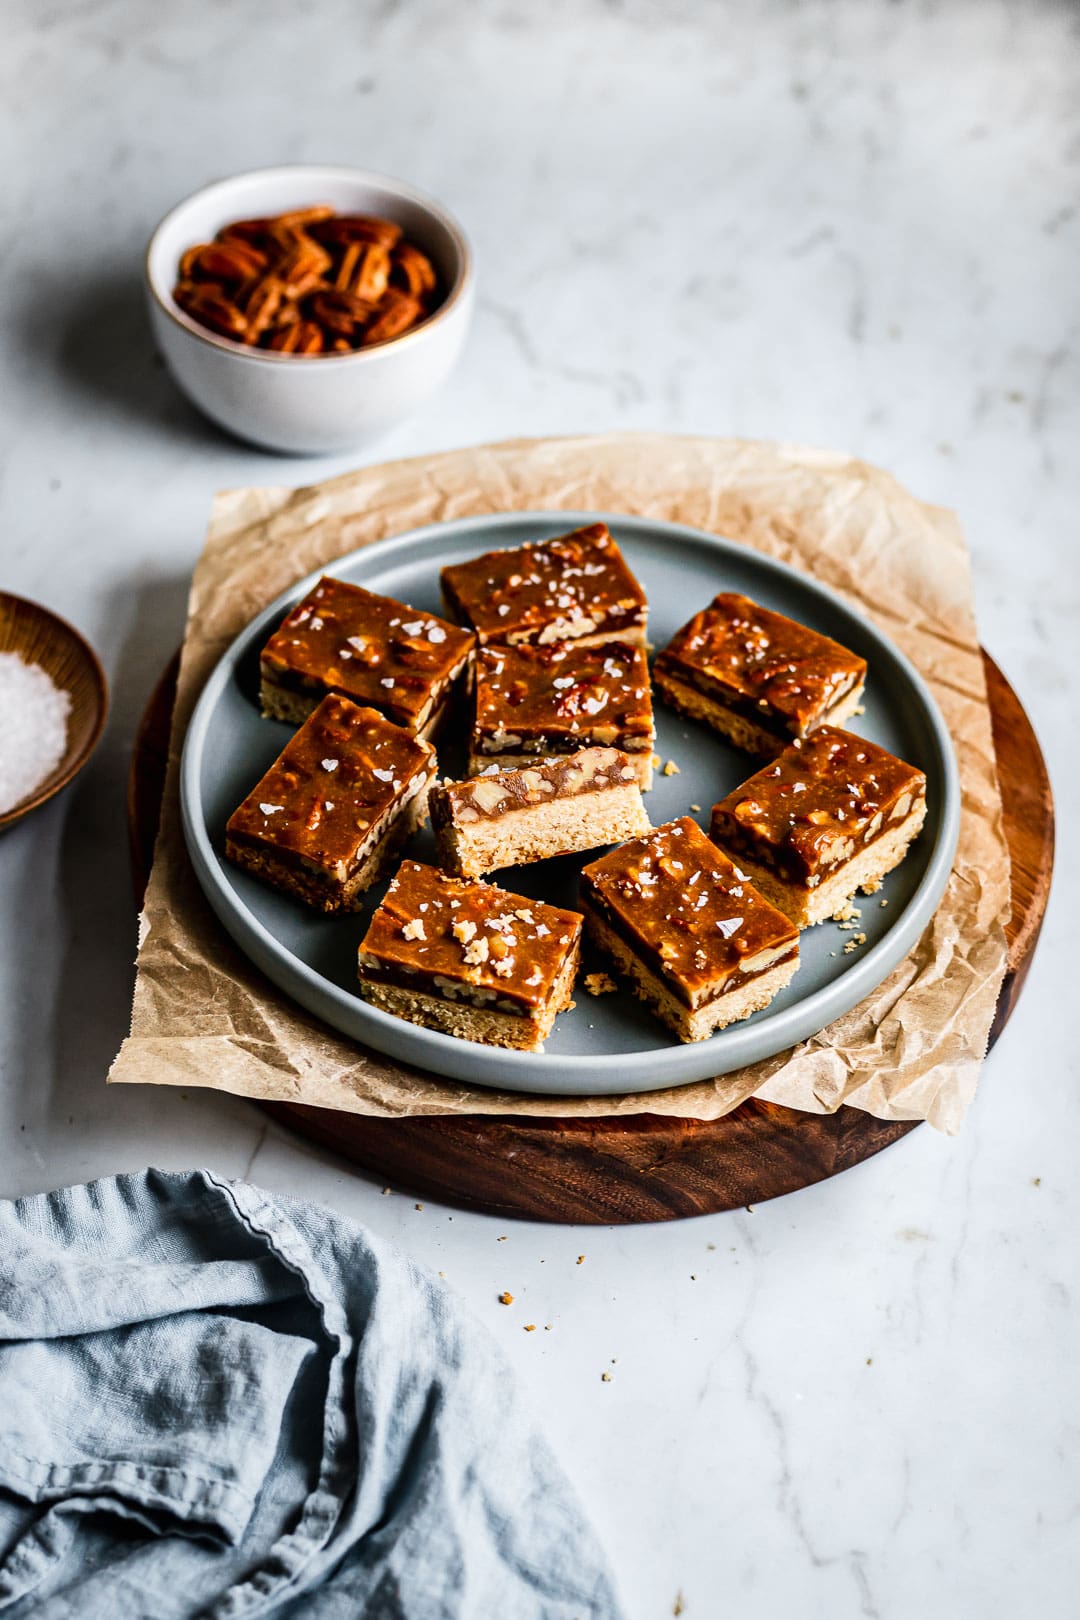 Caramel pecan bars sliced on a plate on a marble surface